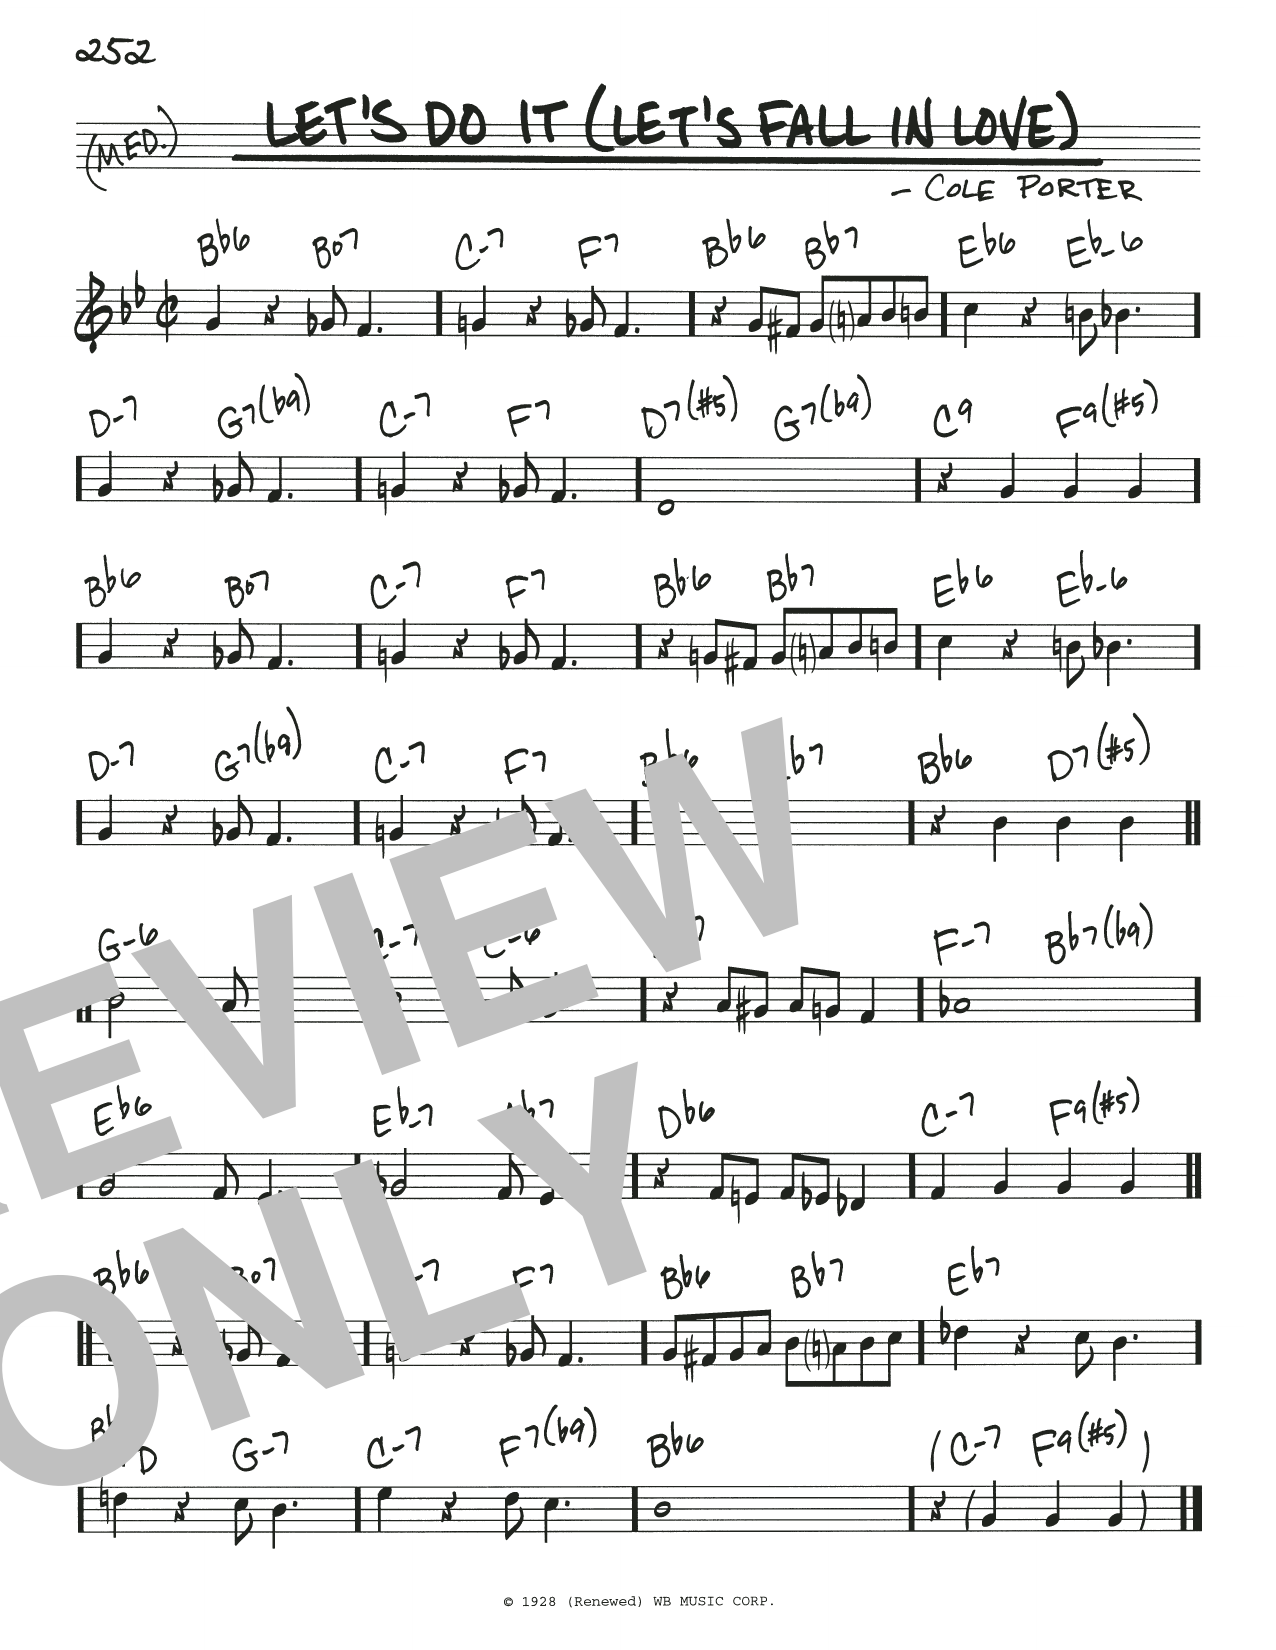 Download Cole Porter Let's Do It (Let's Fall In Love) Sheet Music